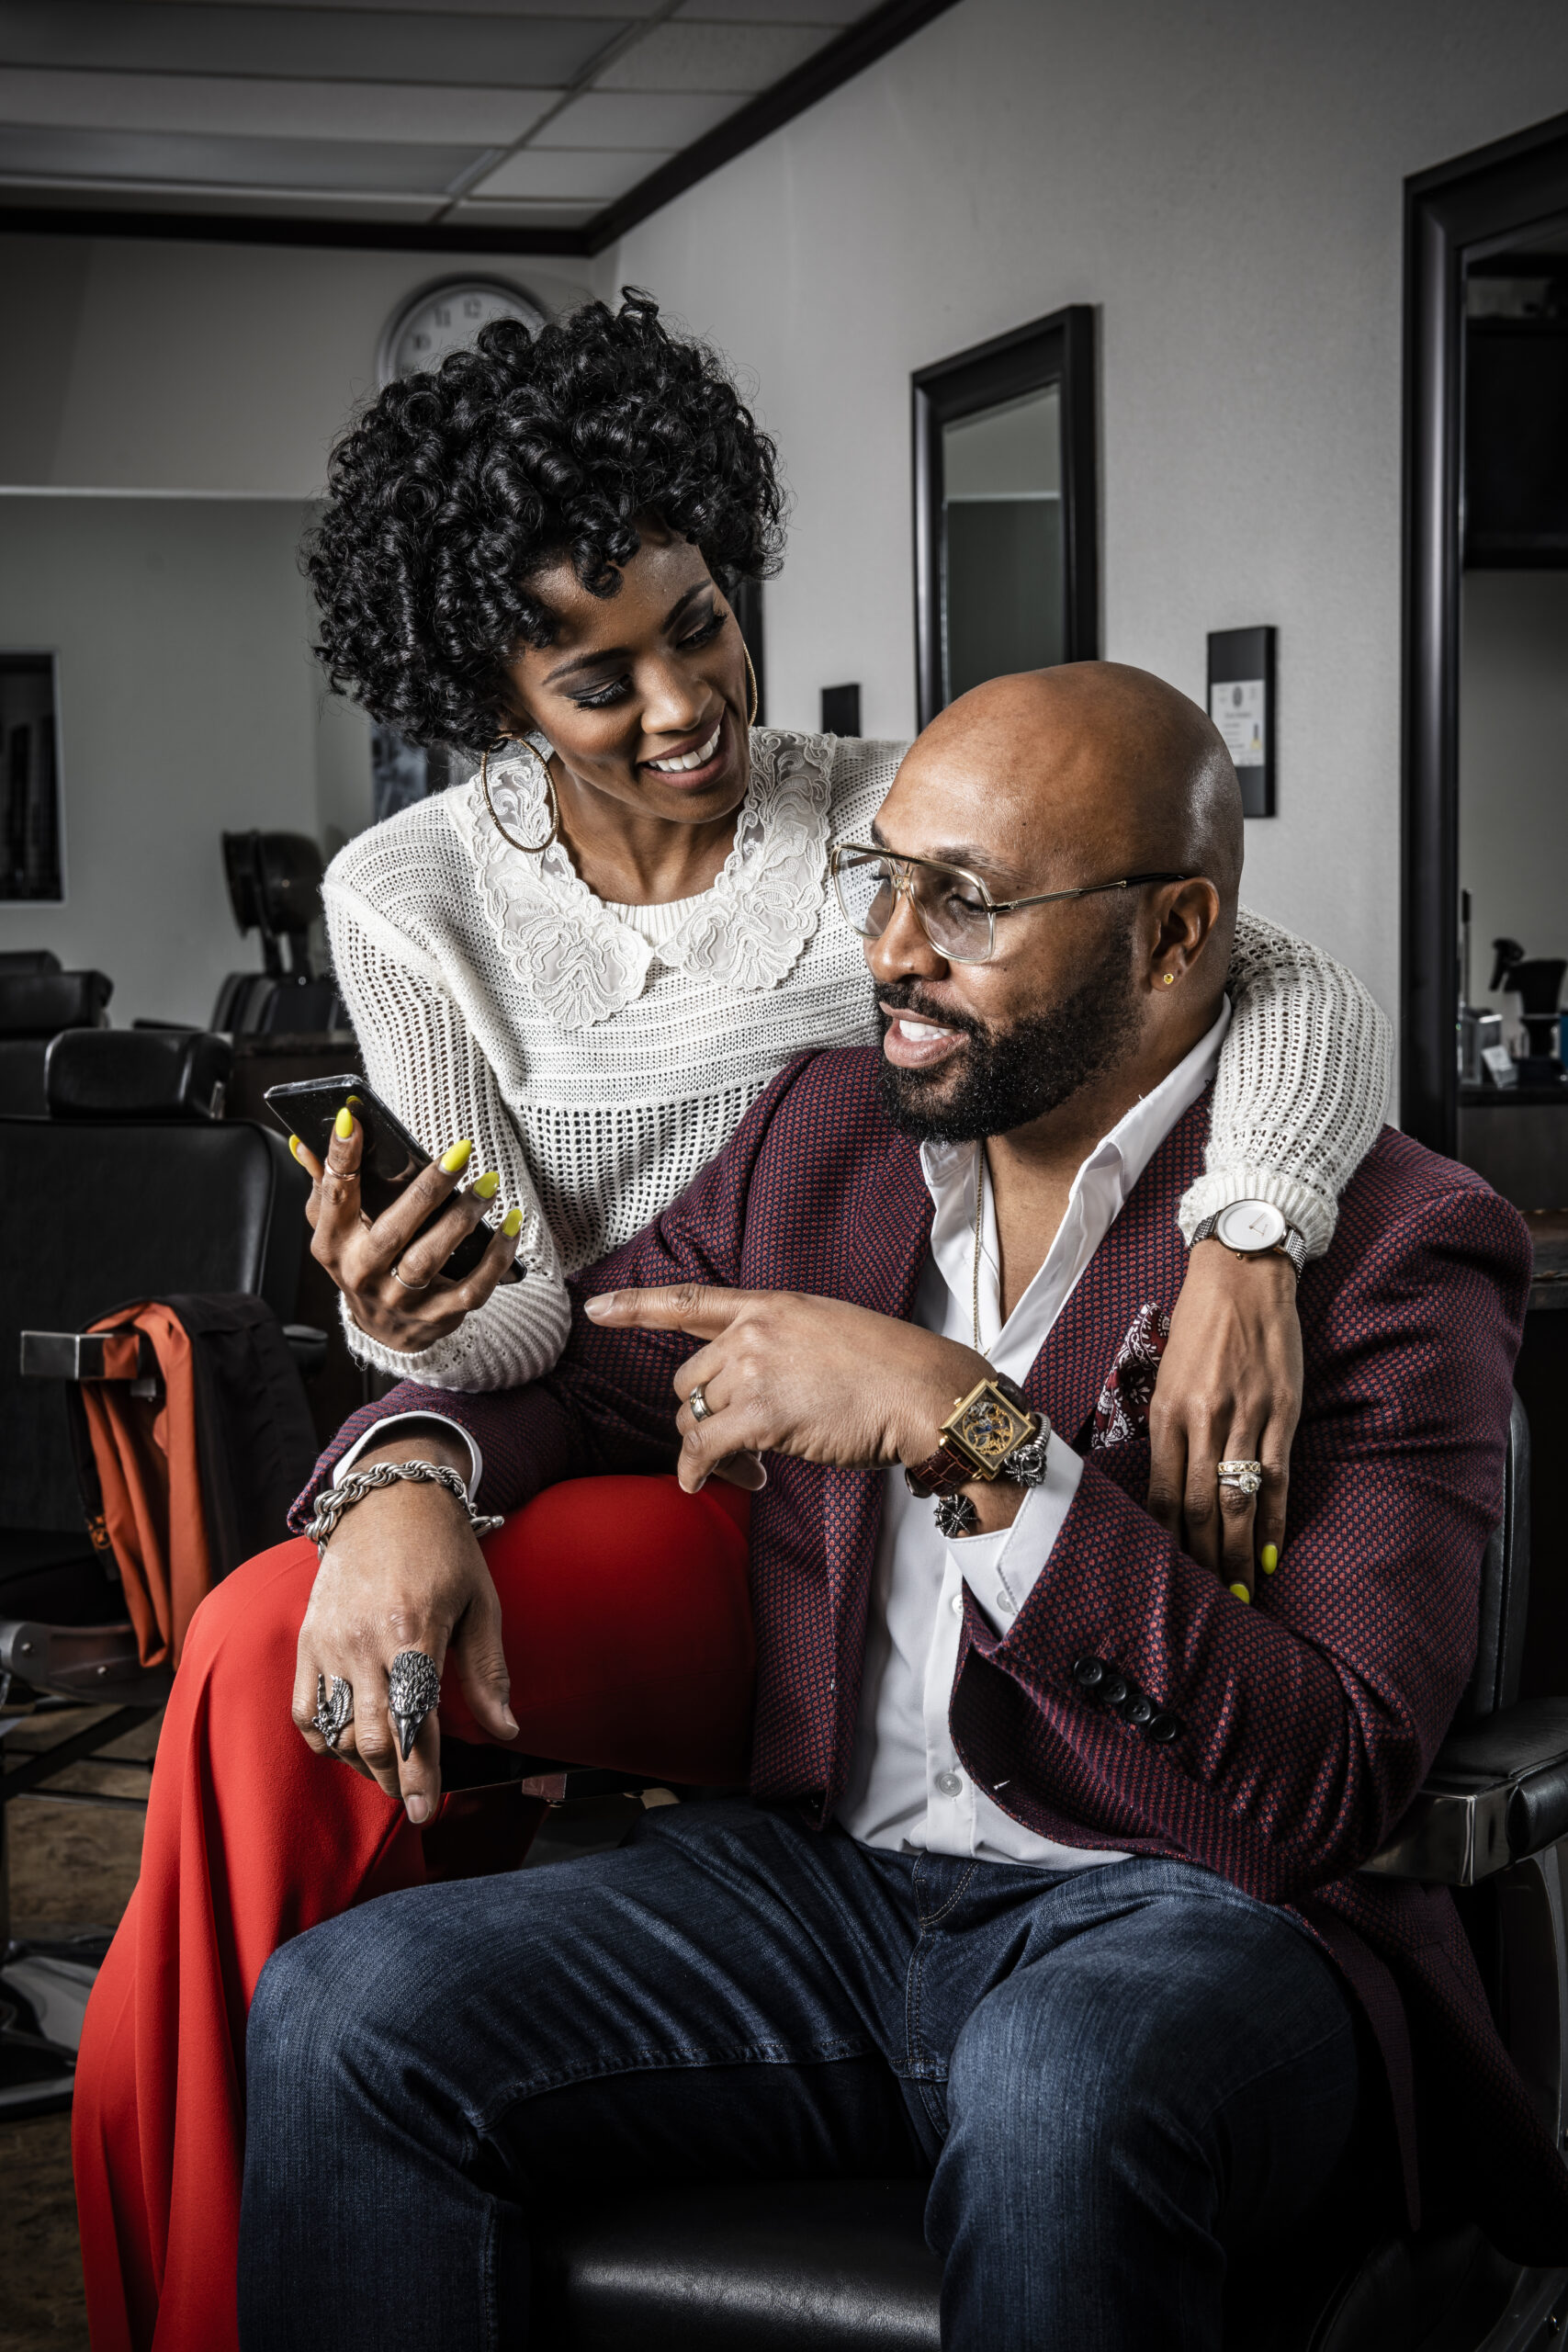 Cox Alumni Courtney Caldwell and her husband Tye Caldwell, pose at Salon74 by Tye and their We Work space, Monday, December 17, 2018. They developed the app ShearShare to help salons and barbers fill empty chairs.